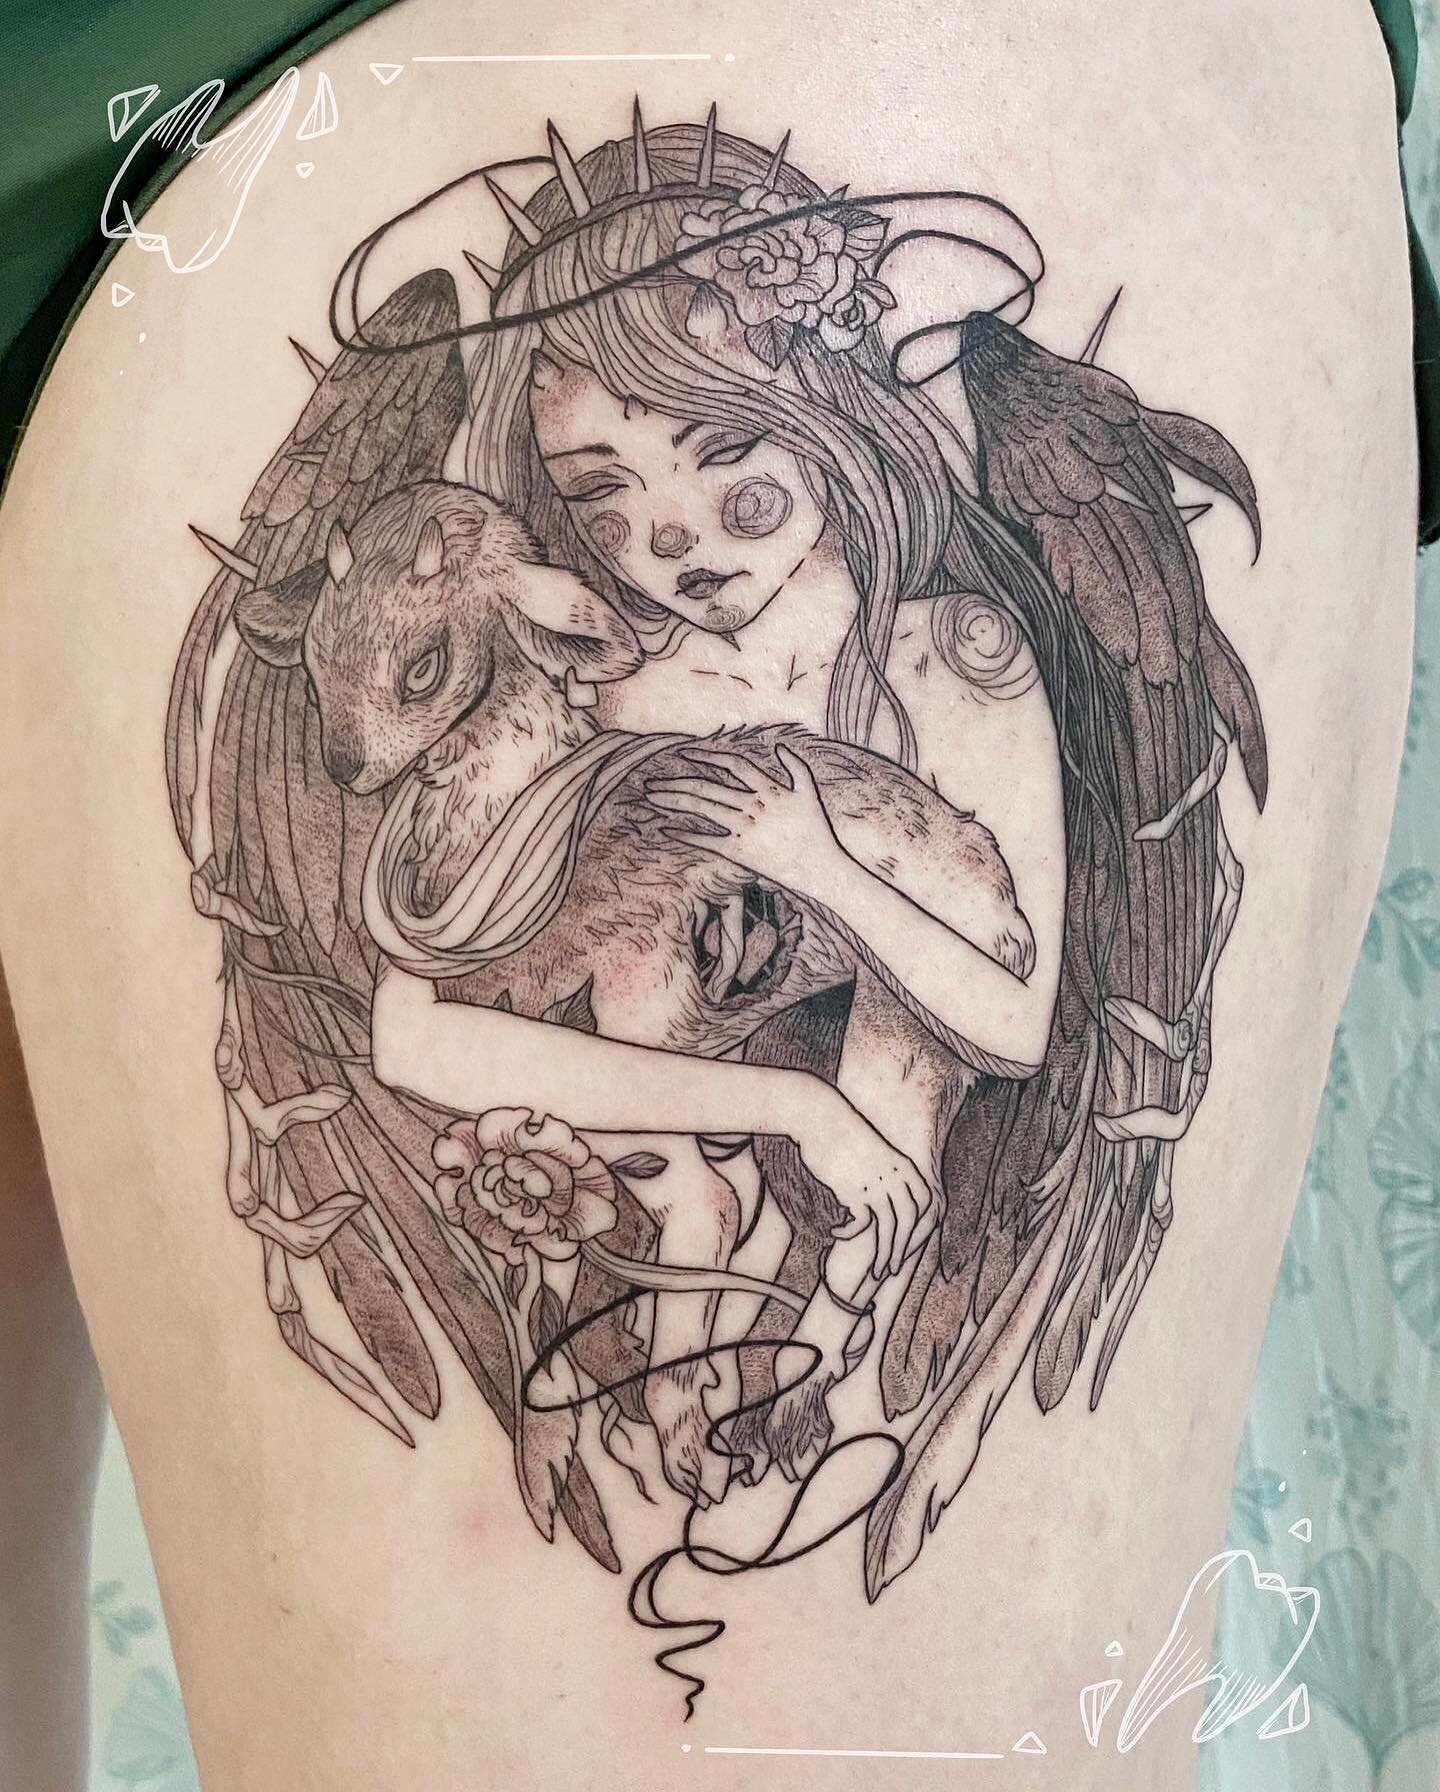 A hauntingly beautiful angel and her goat by Maria @duskatdaybreak - who says flash tattoos have to be small?!
.
.
.
.
.
#creepycute #spookytattoo #illustrativetattoo #portraittattoo #illustrationtattoo #detailedtattoo #blackwork #blackworktattoo #bl